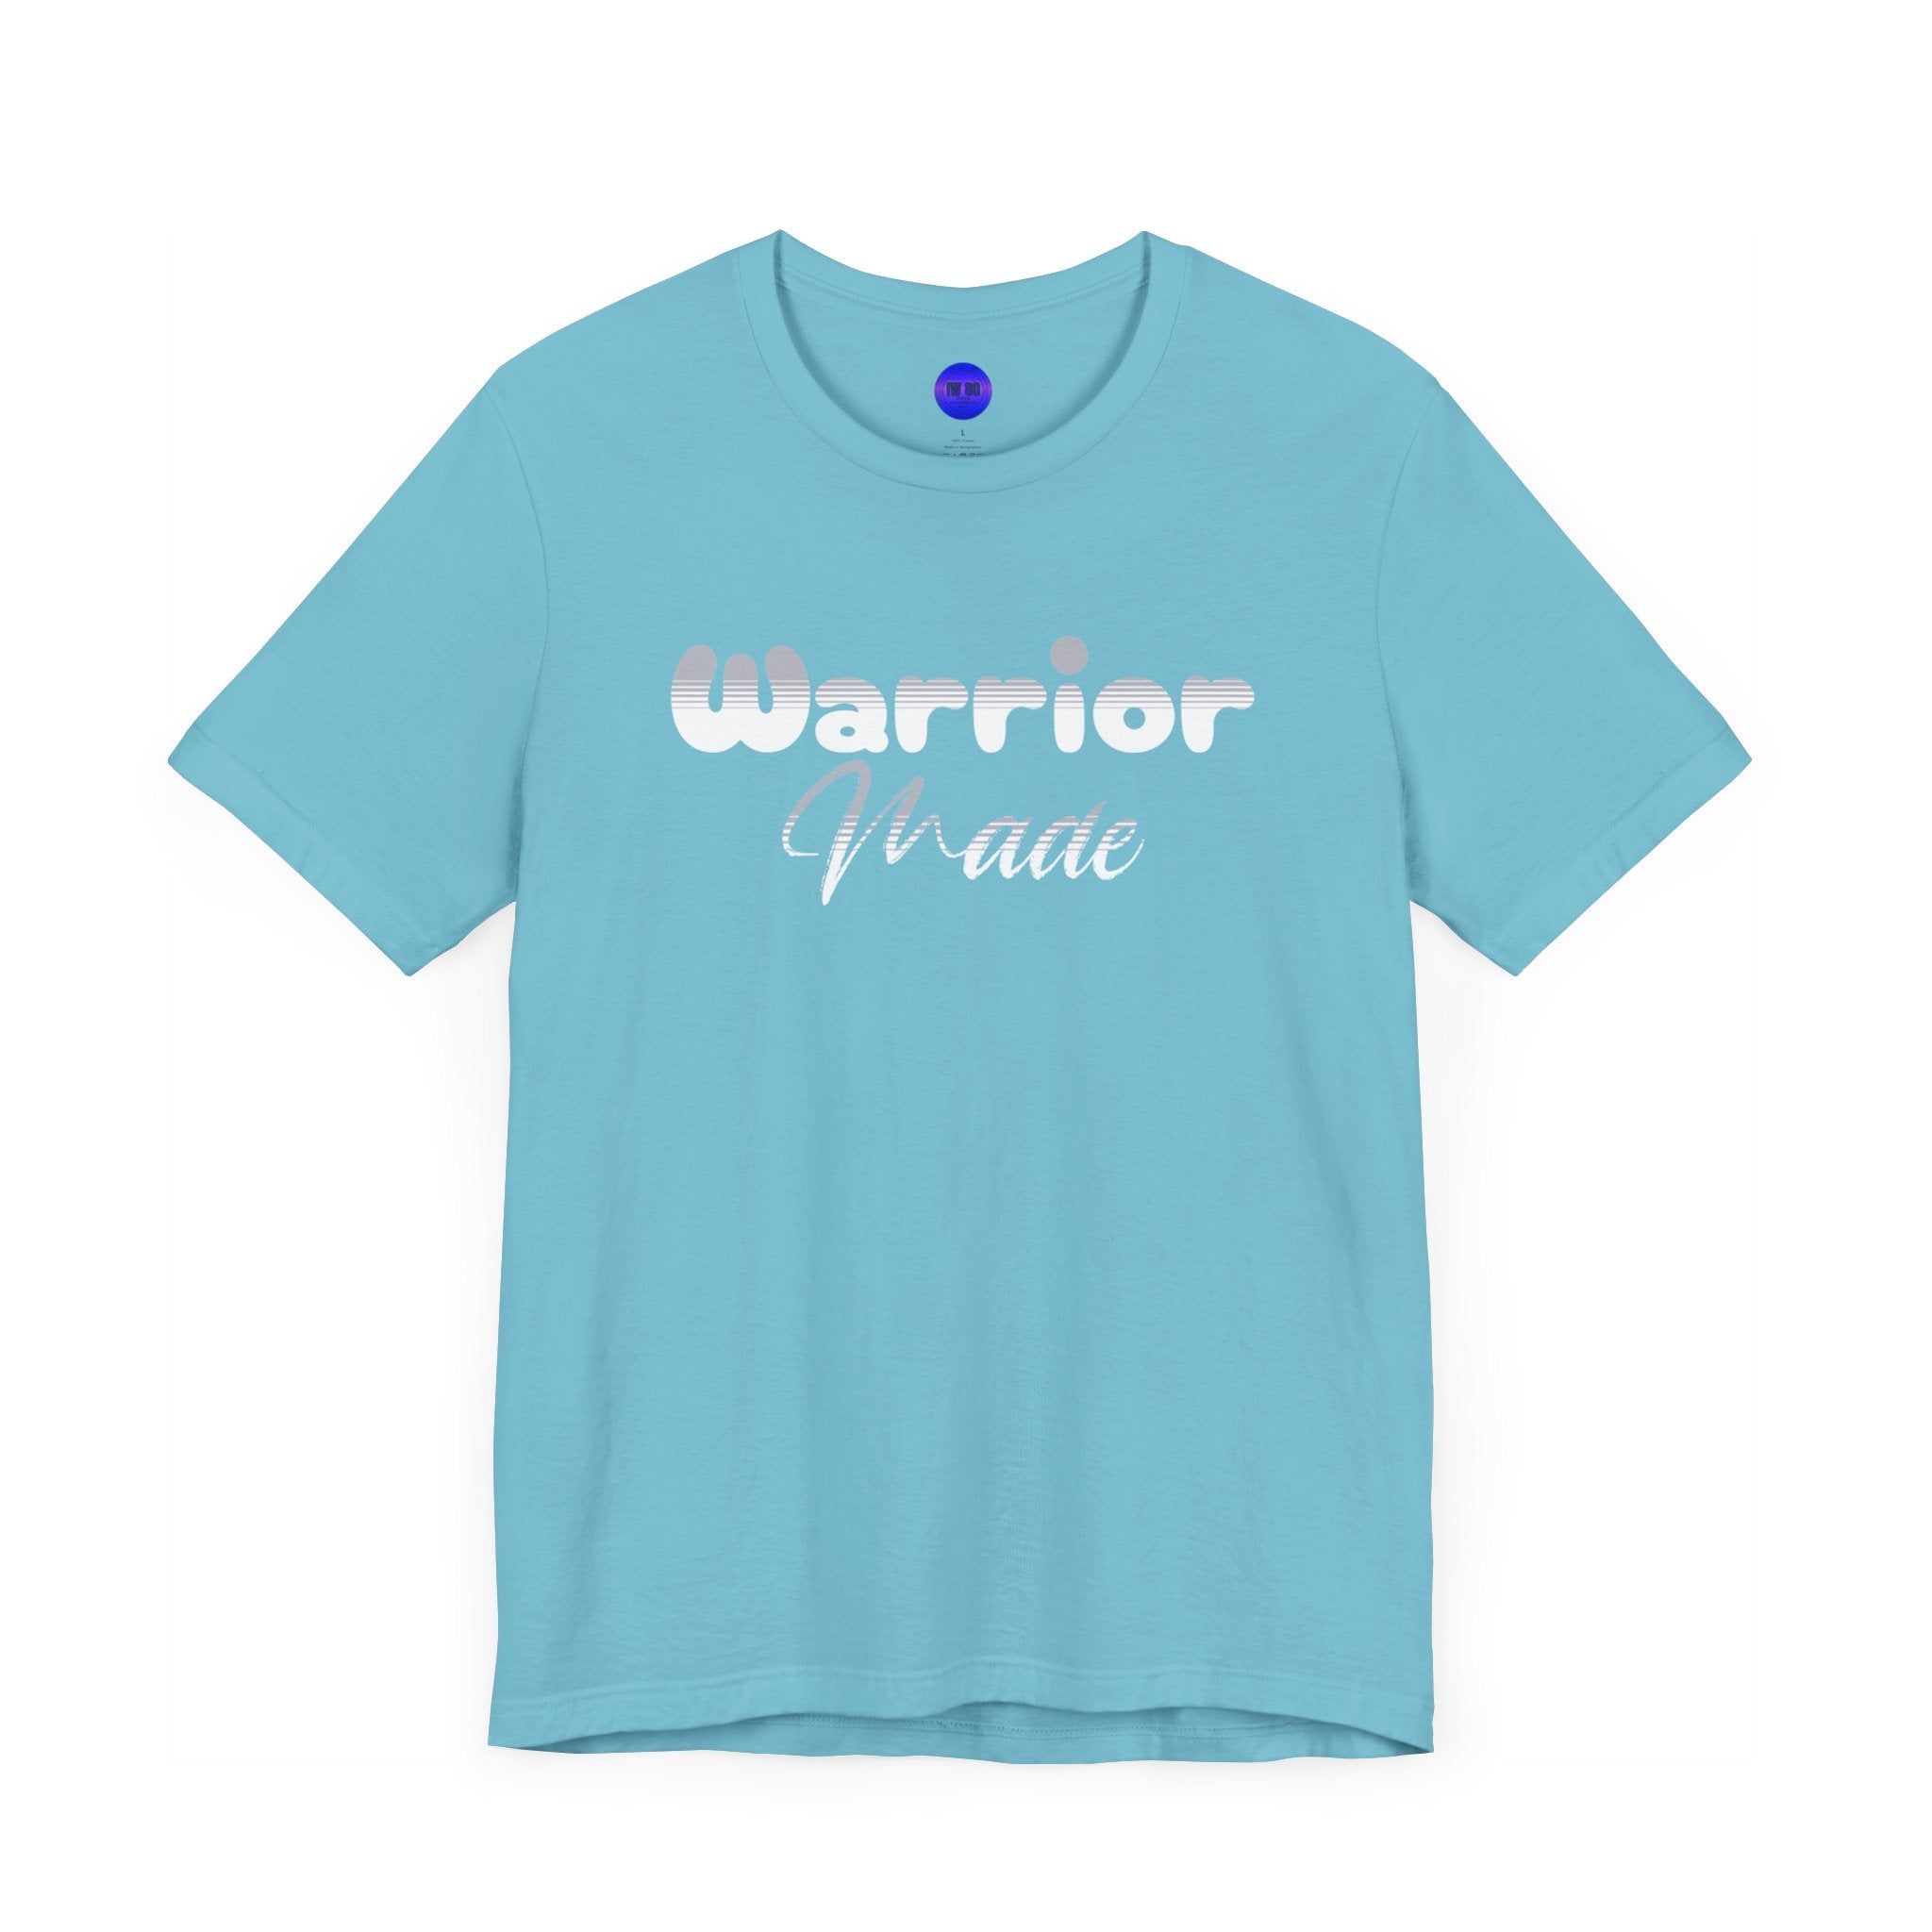 Warrior Made, Native Collection, Orange, Black, Turquoise, or Red, Unisex Jersey Short Sleeve Tee